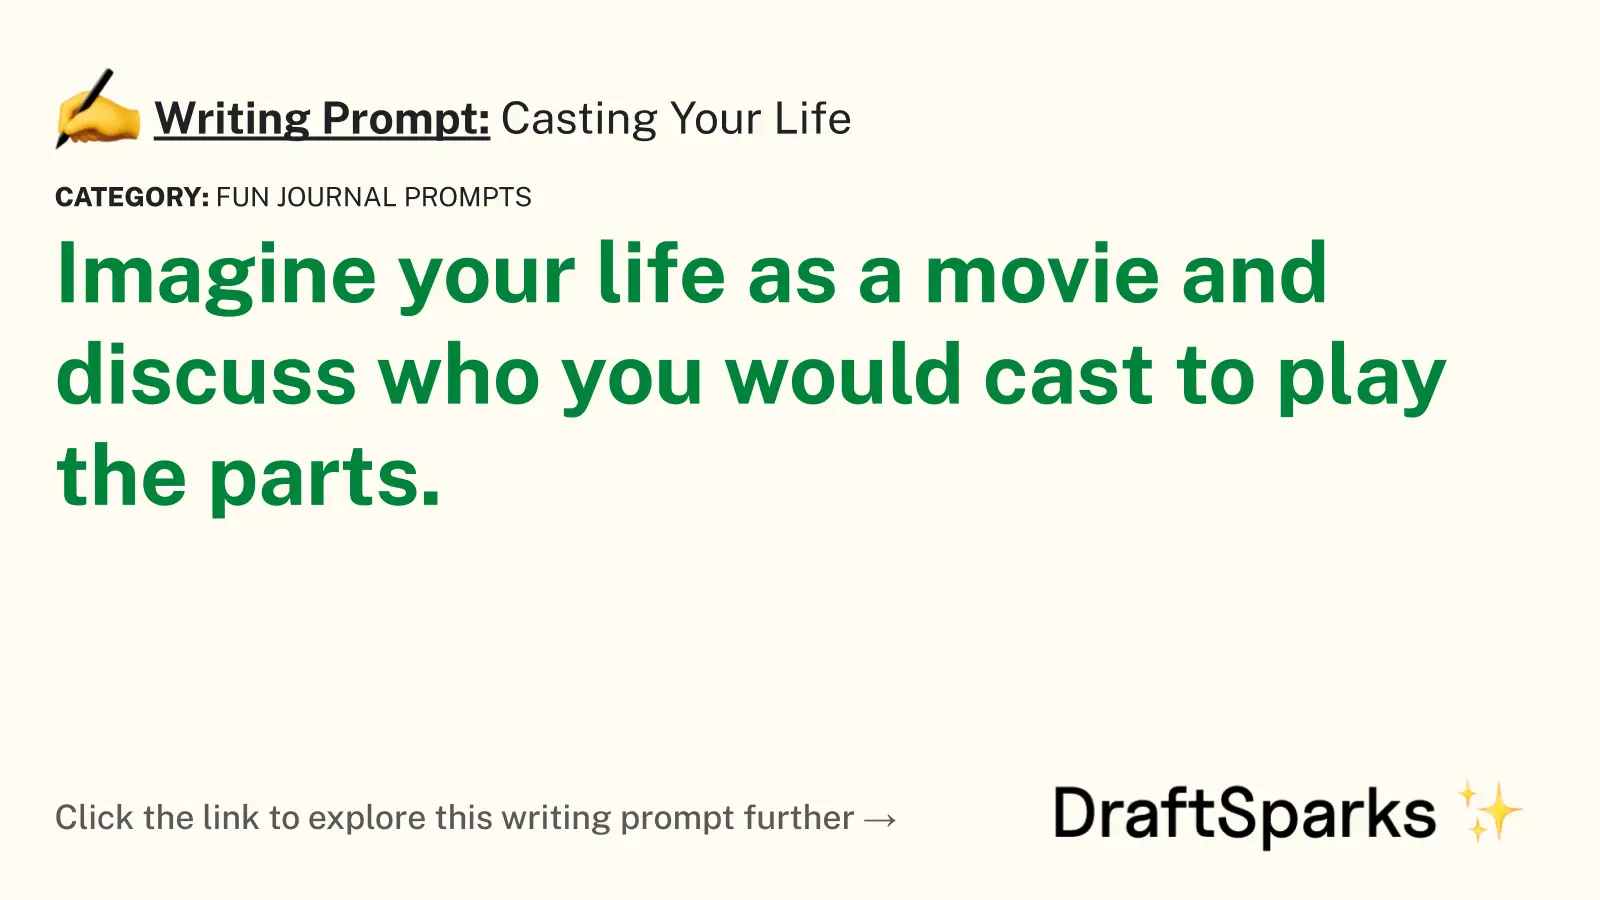 Casting Your Life